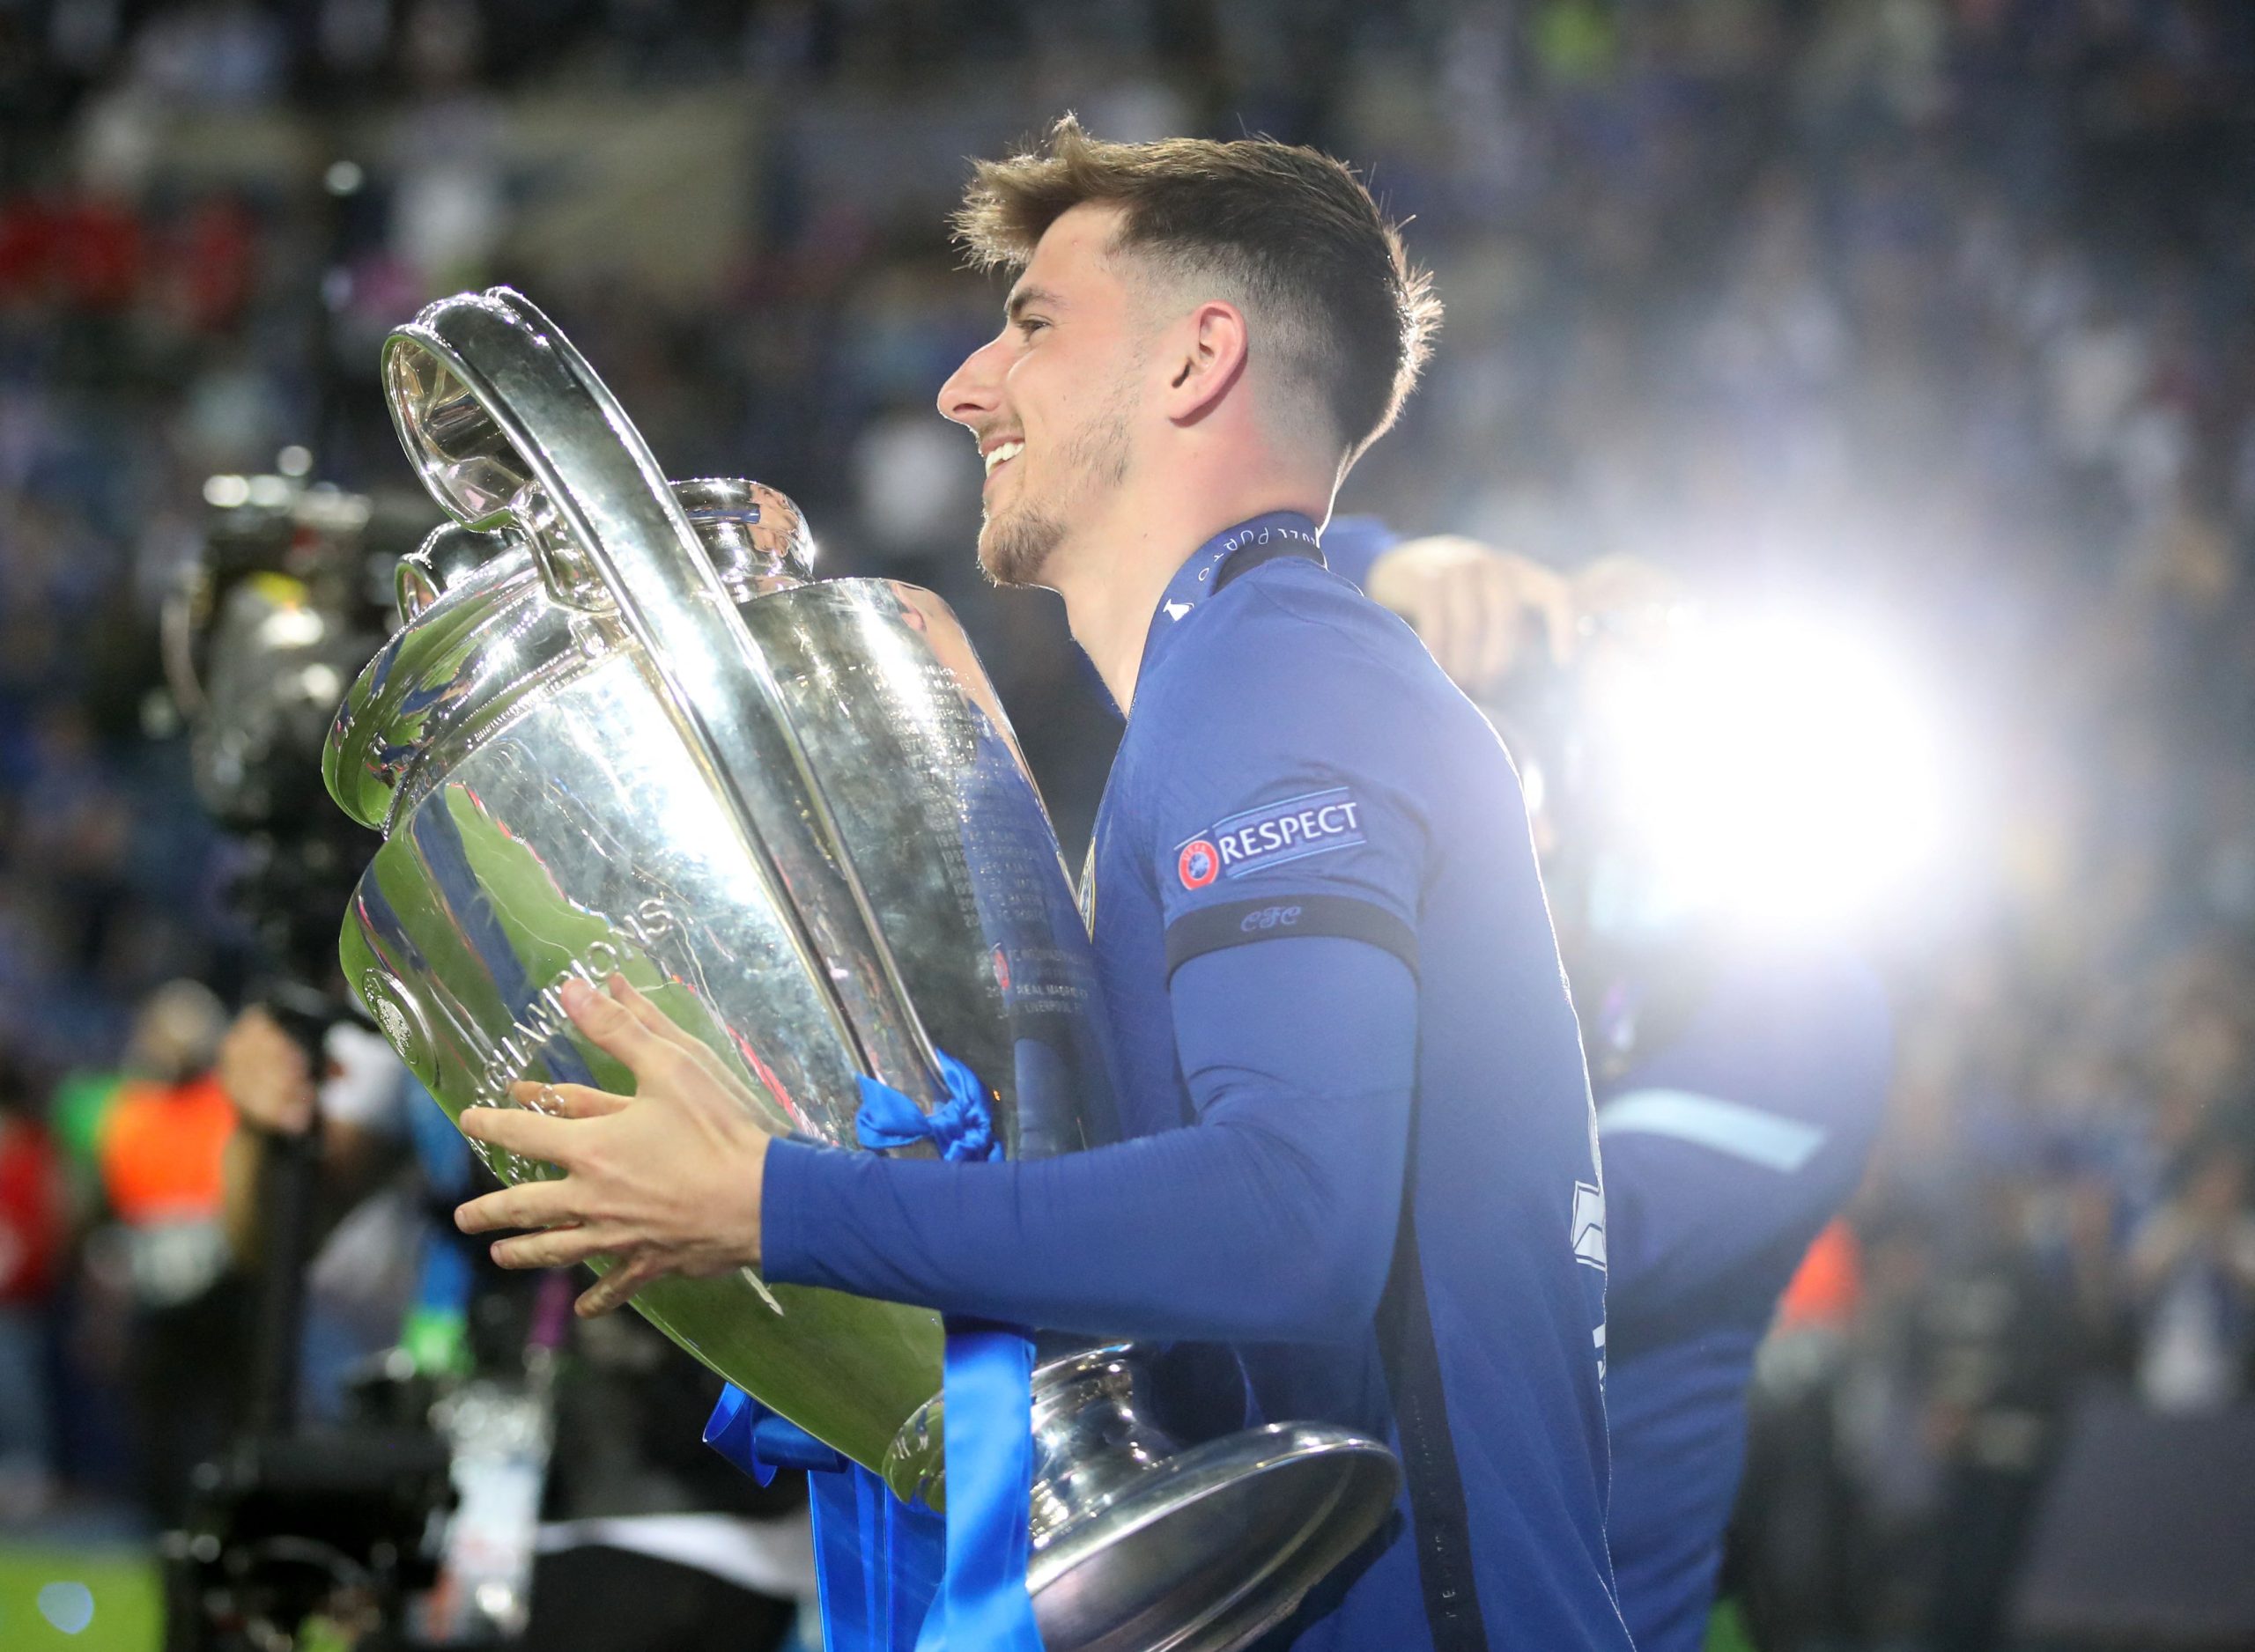 Chelsea's English midfielder Mason Mount holds the Champions League trophy after Chelsea won the UEFA Champions League final football match between Manchester City and Chelsea at the Dragao stadium in Porto on May 29, 2021